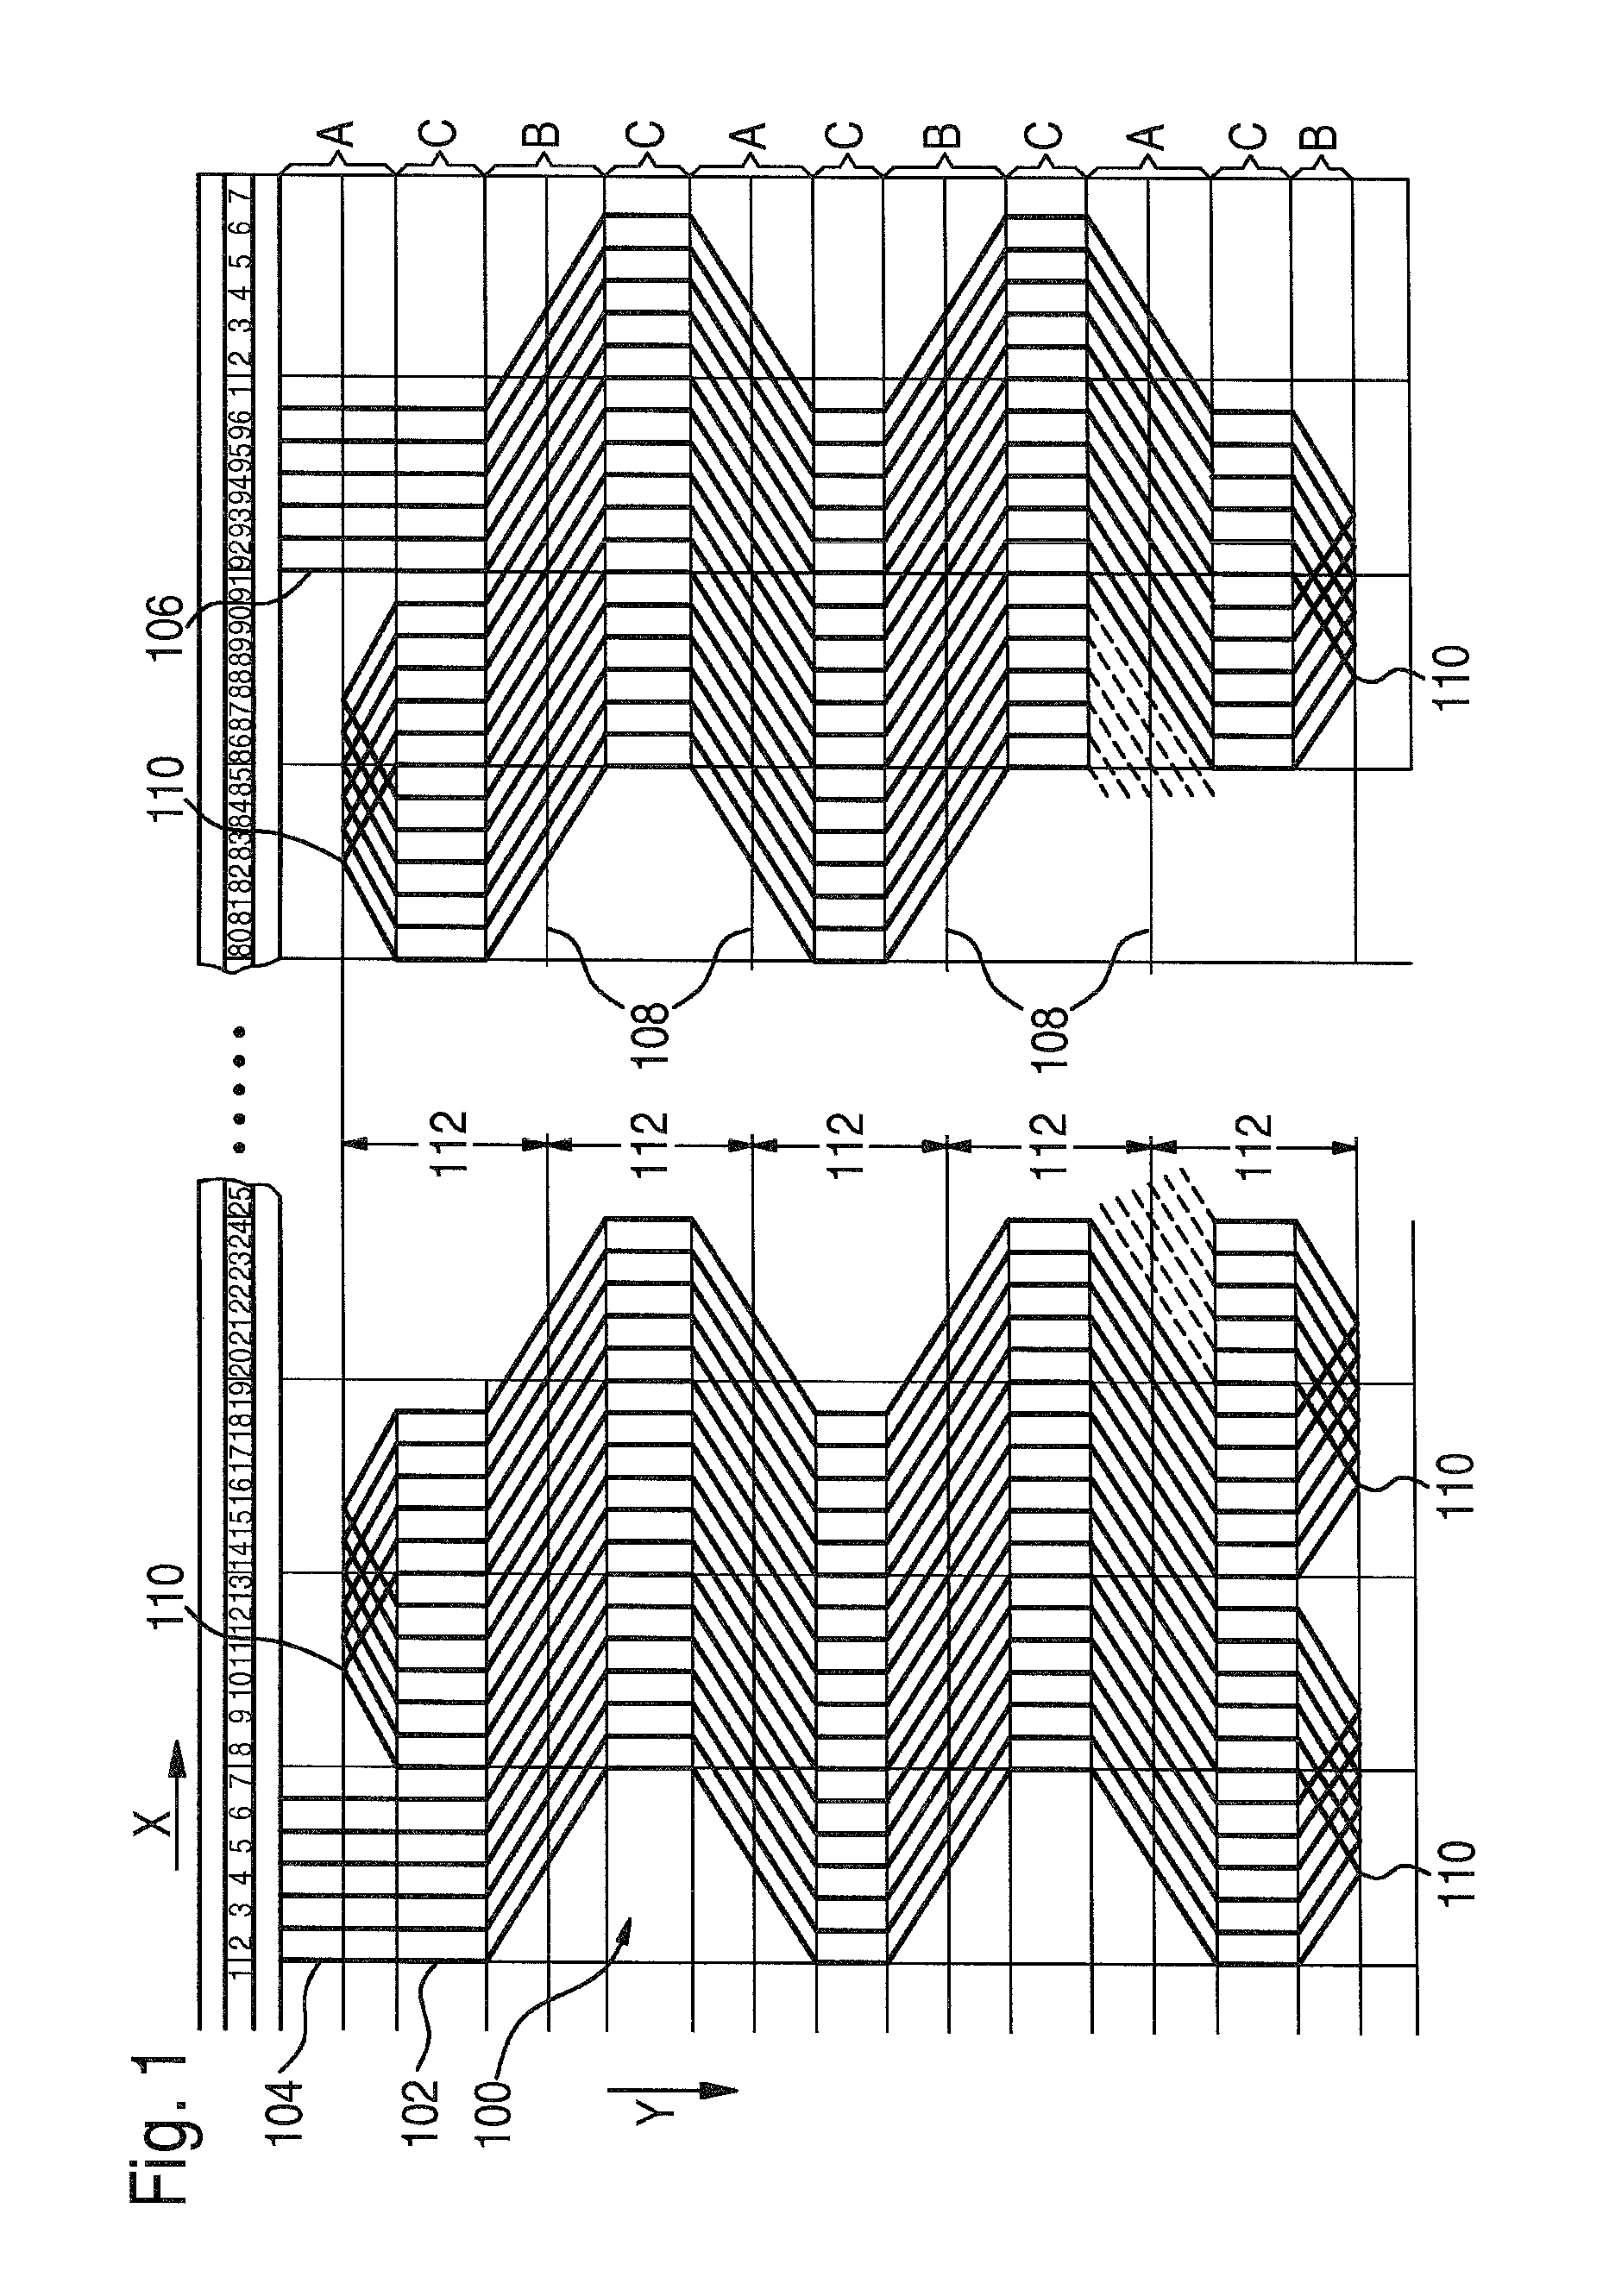 Method of producing a stator winding for an electrical machine